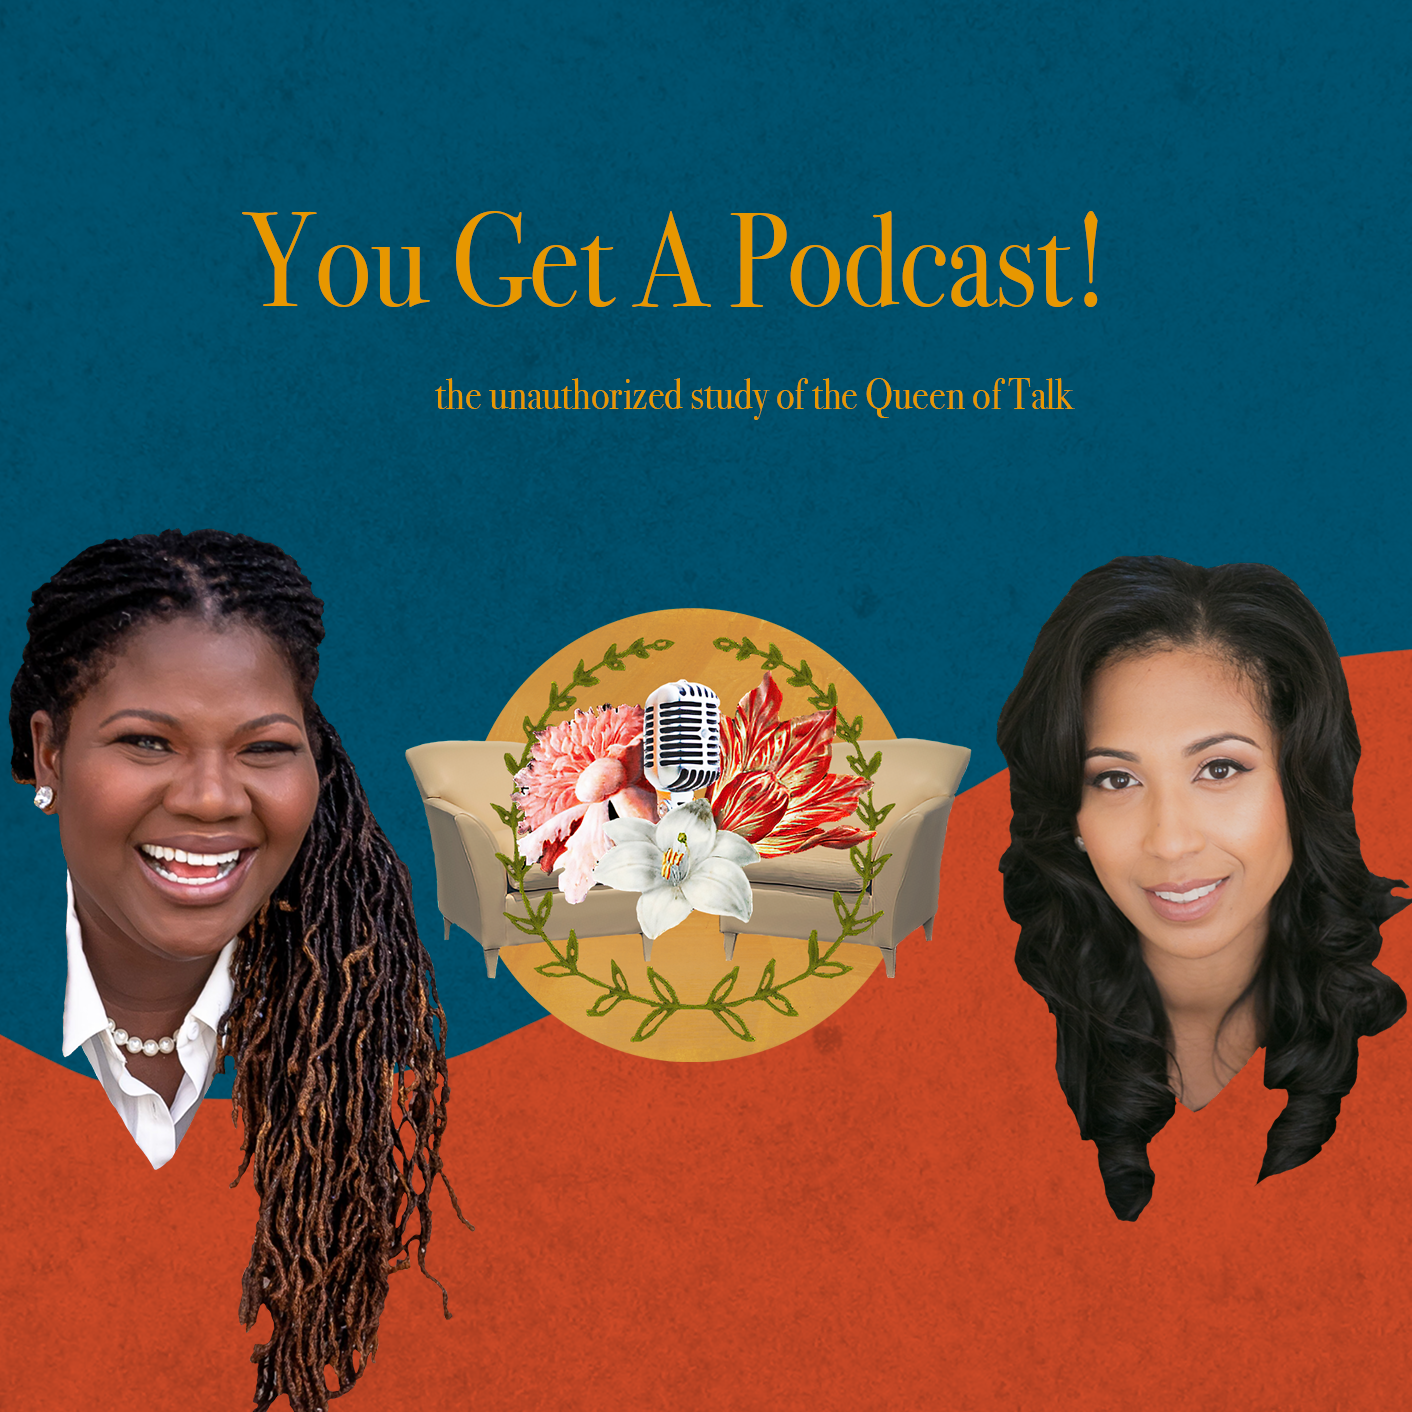 Presenting You Get A Podcast! (The Study of The Queen of Talk)